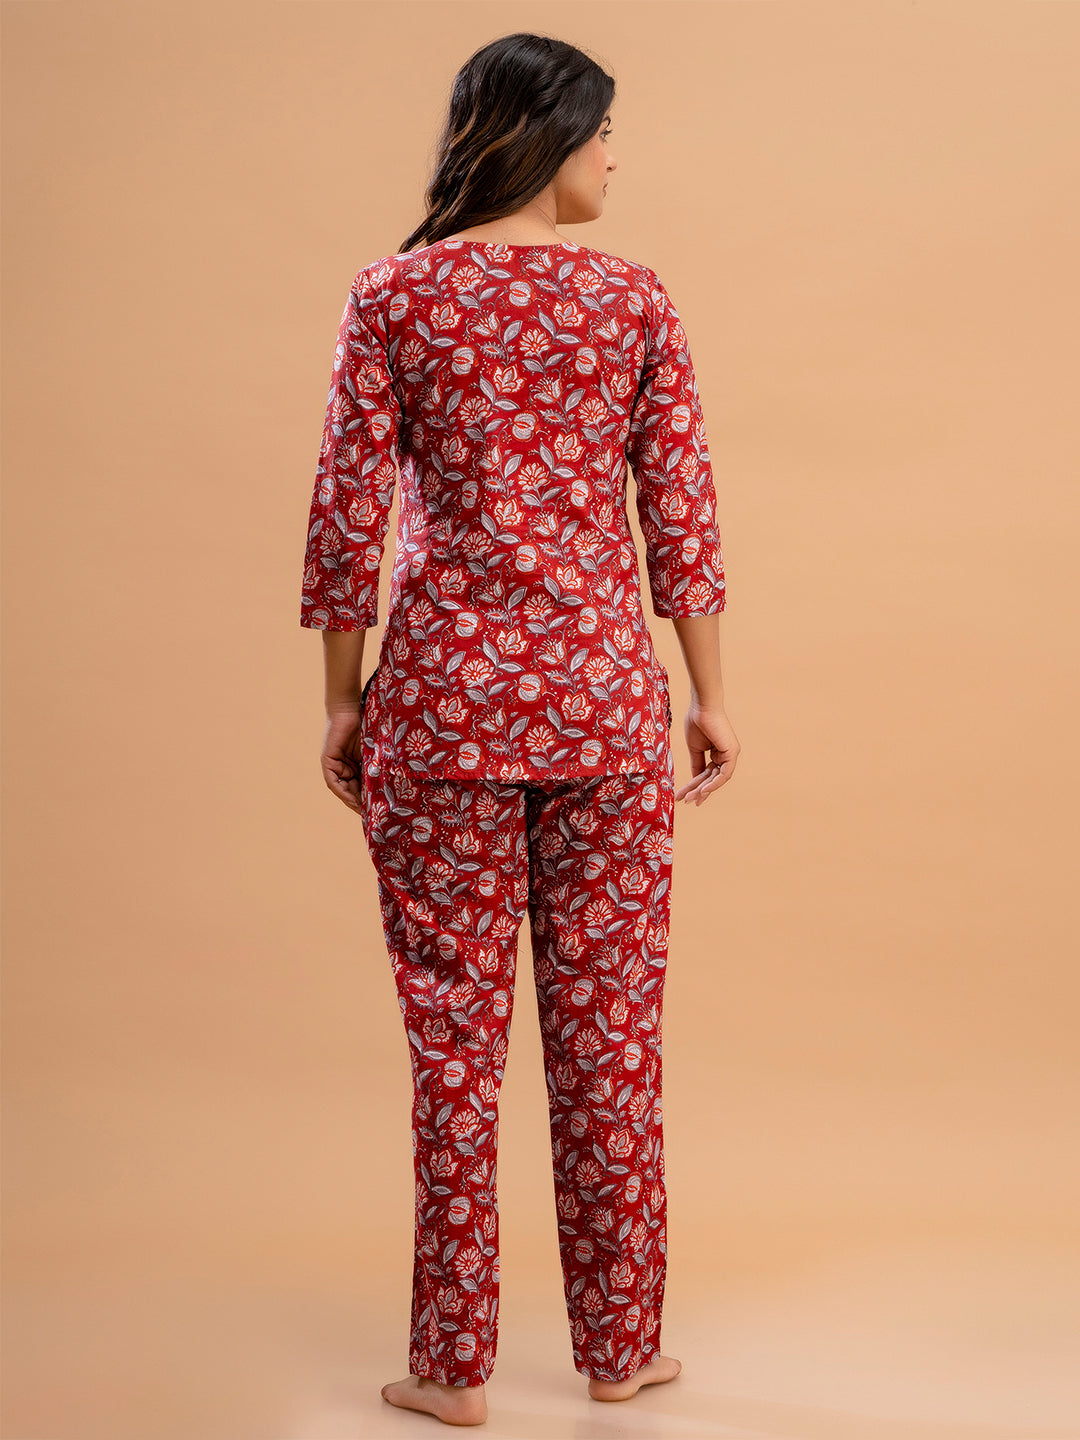 Floral Printed Pure Cotton Night Suits FRLW9032